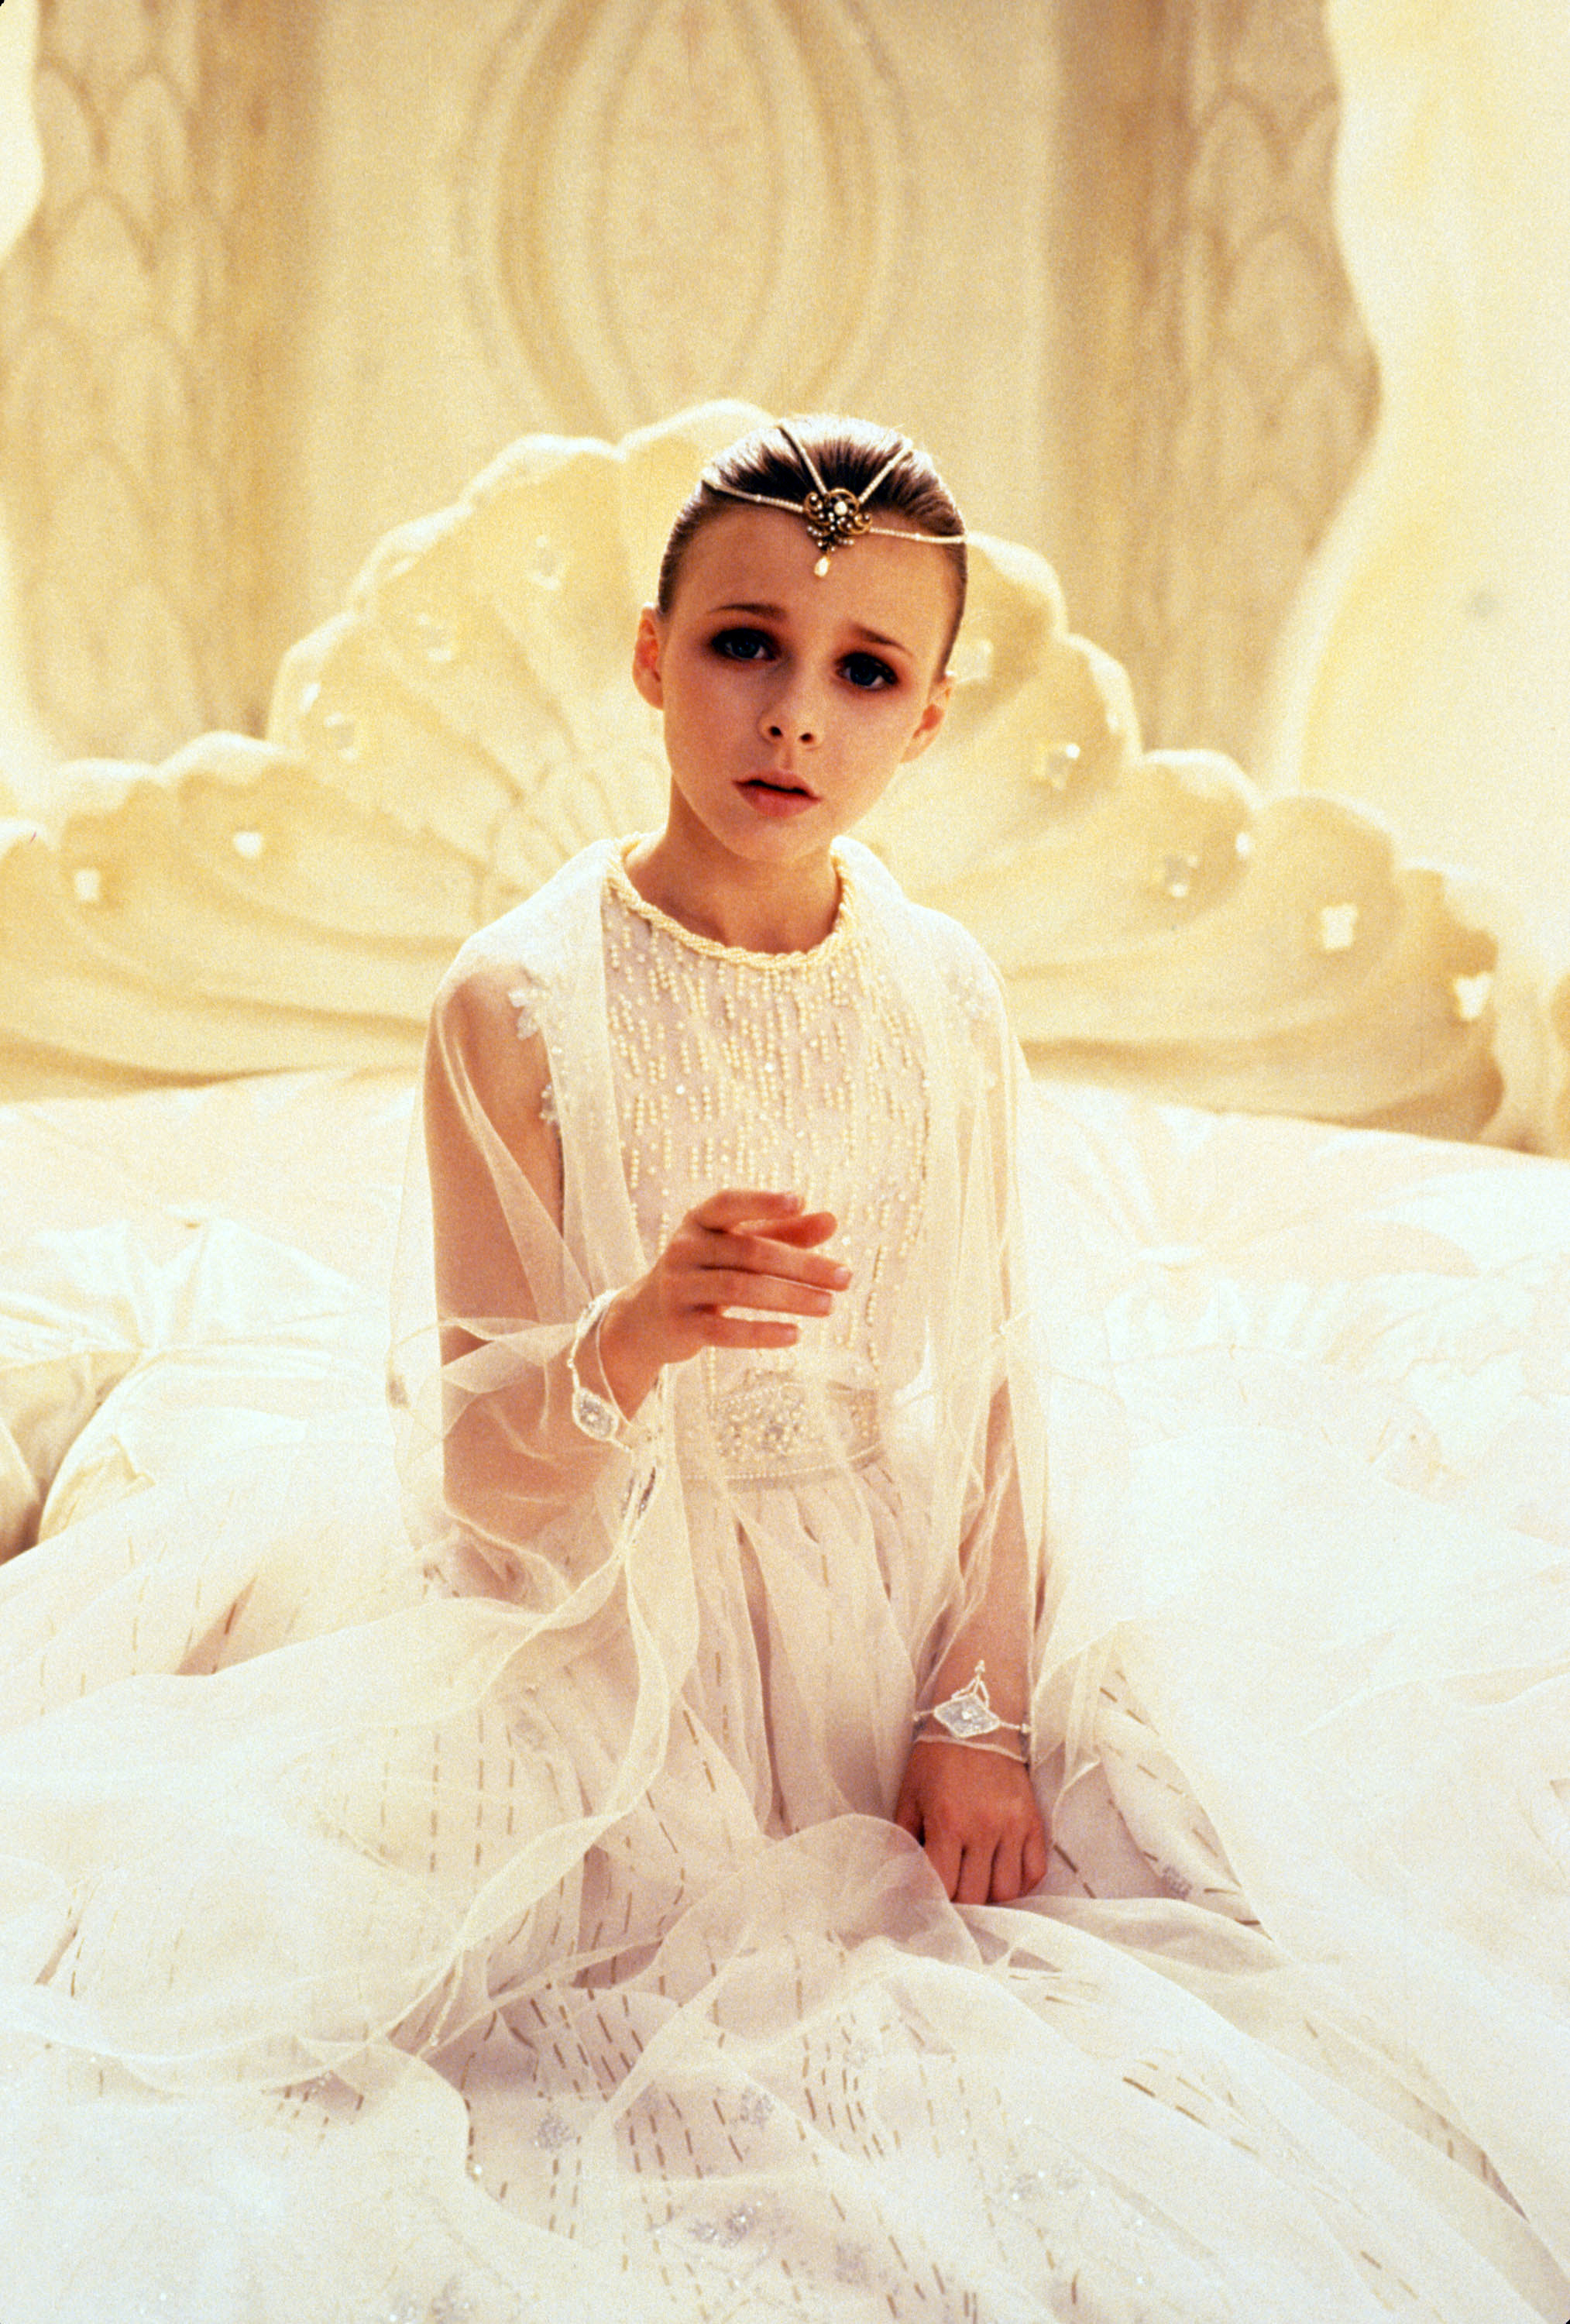 Tami as a child sitting on a lavish bed in a gauzy, bejeweled outfit